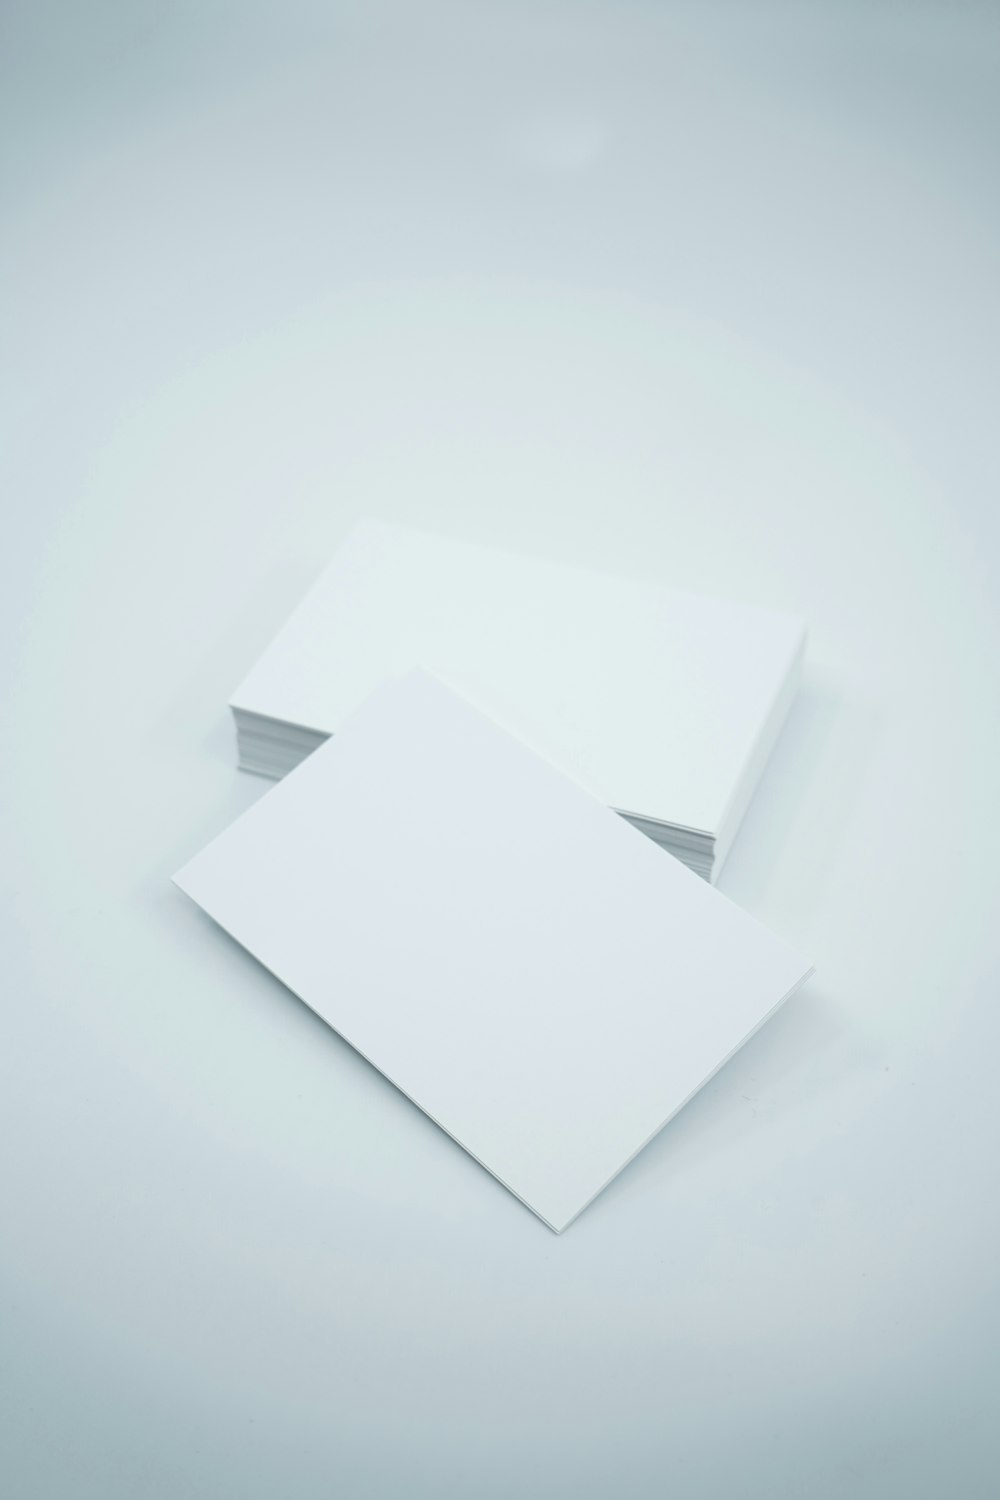 two blank paper sheets on a white background